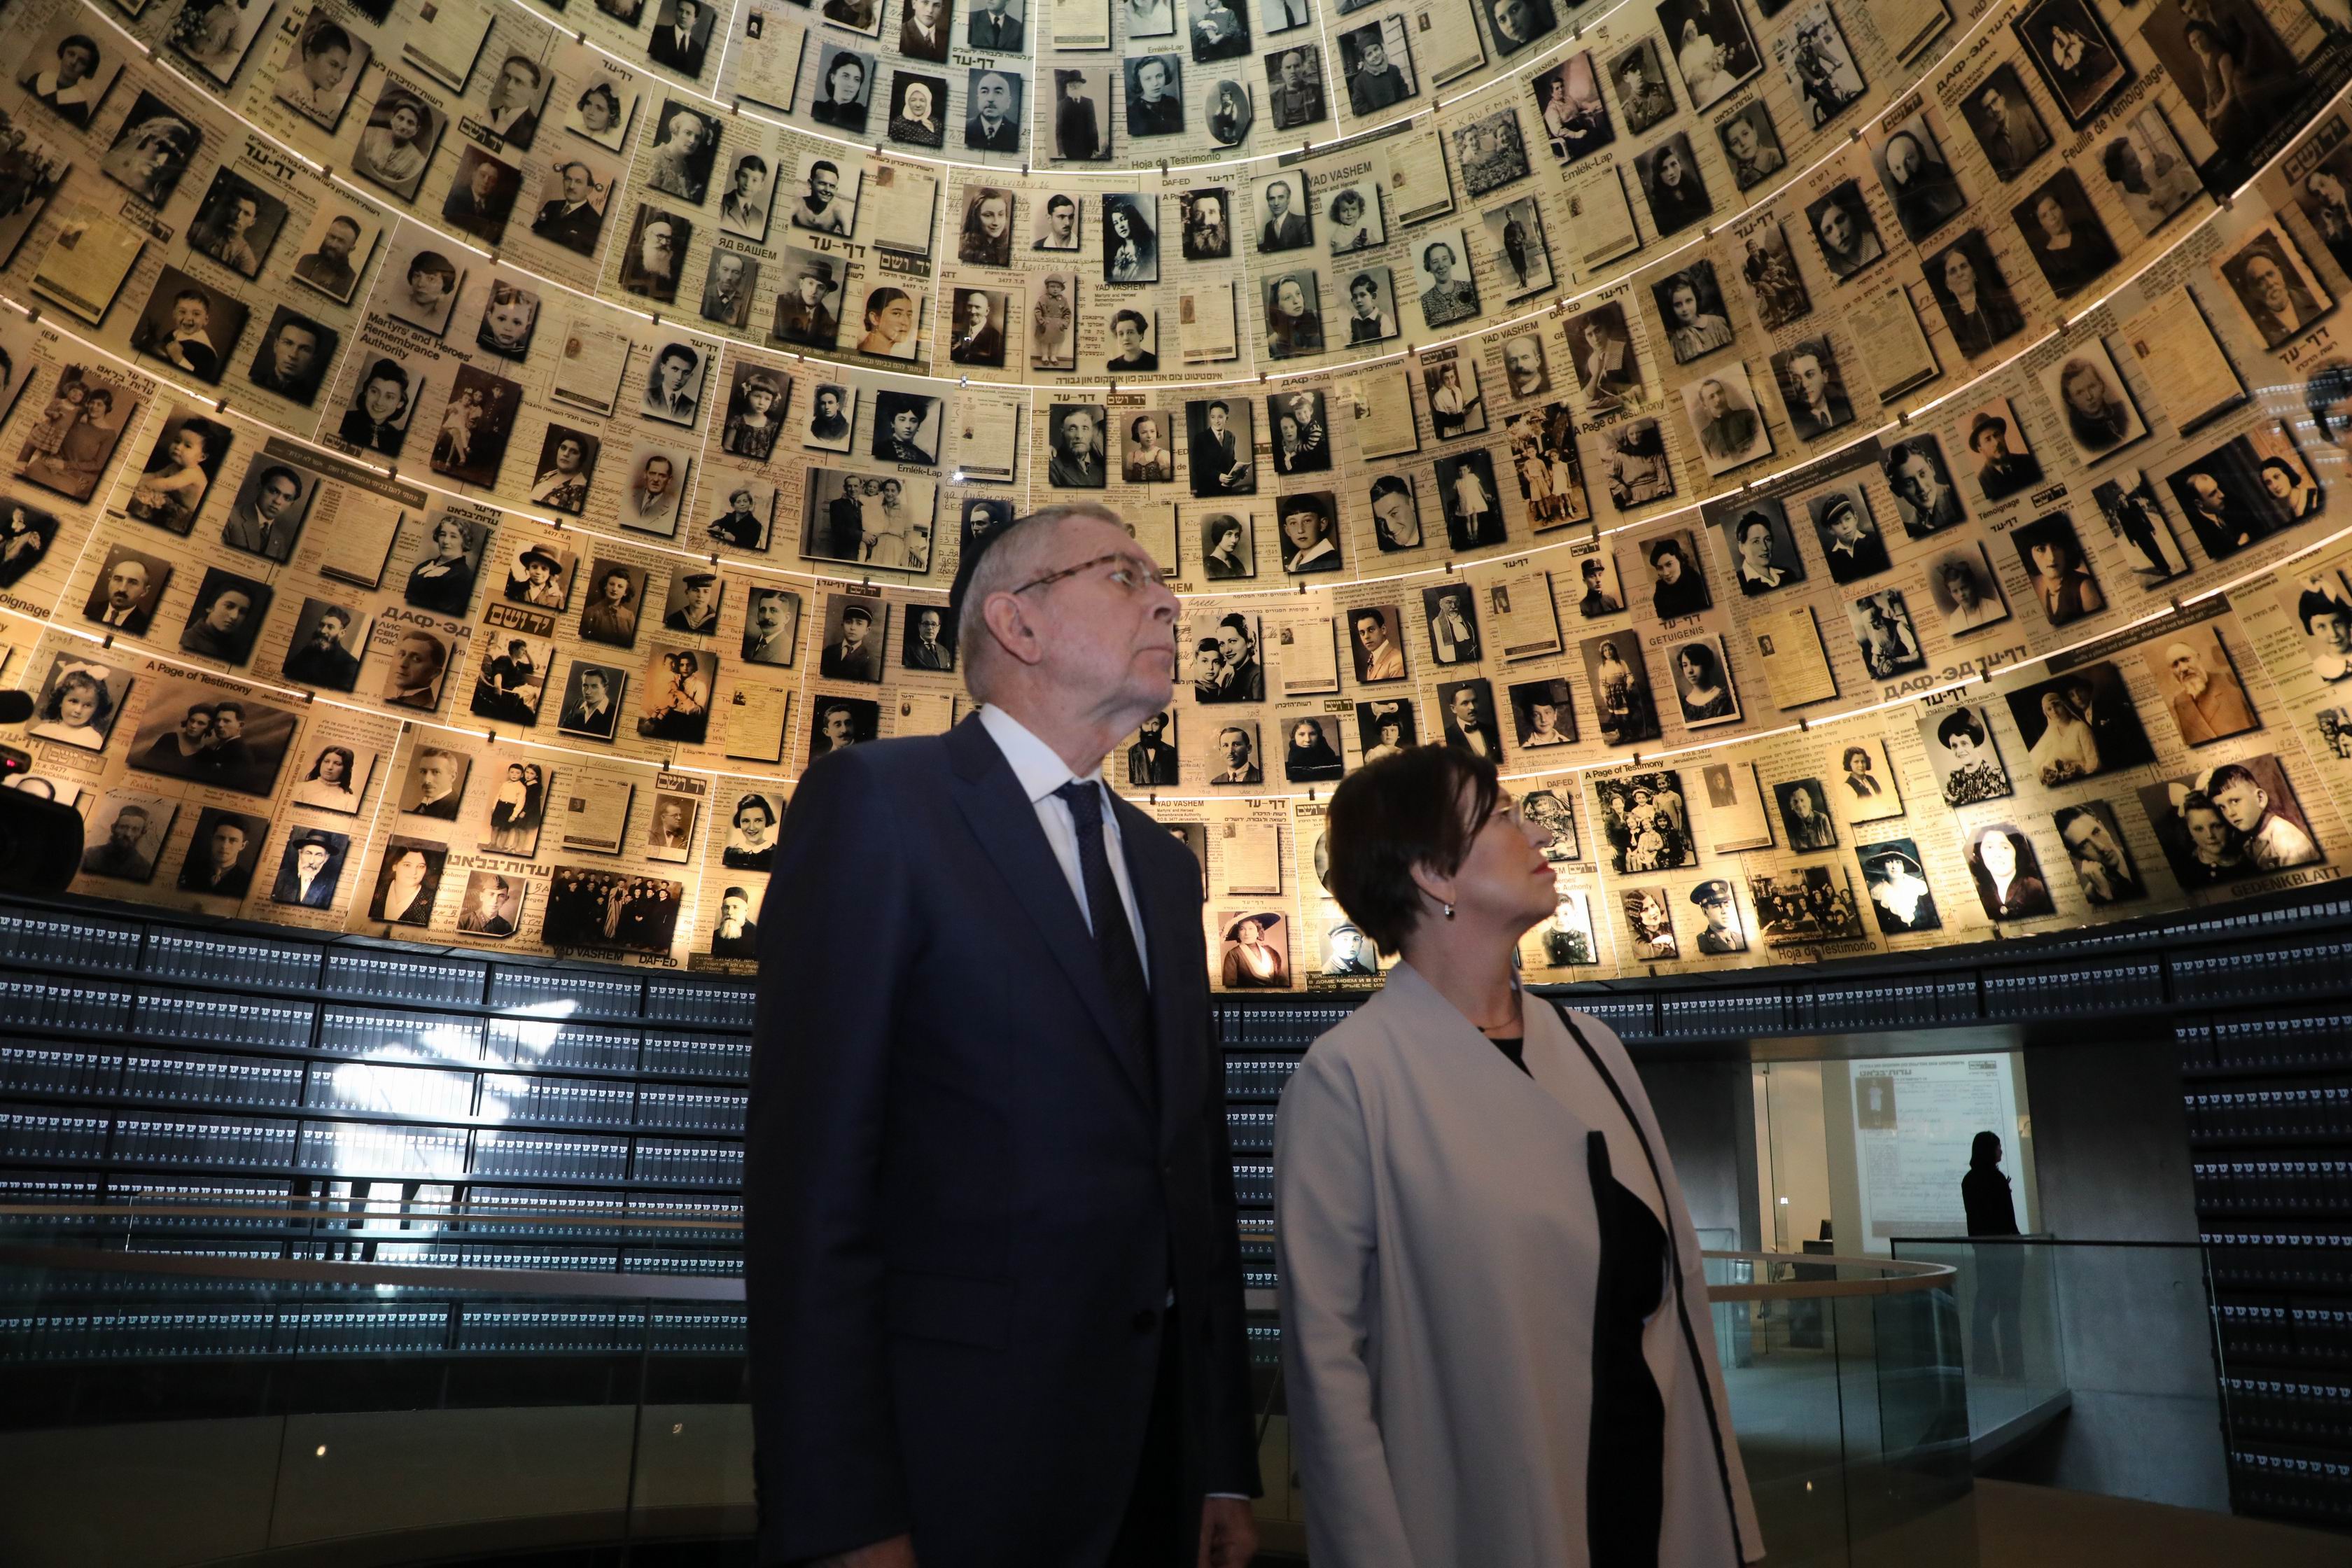 The President and First Lady of Austria in the Hall of Names 